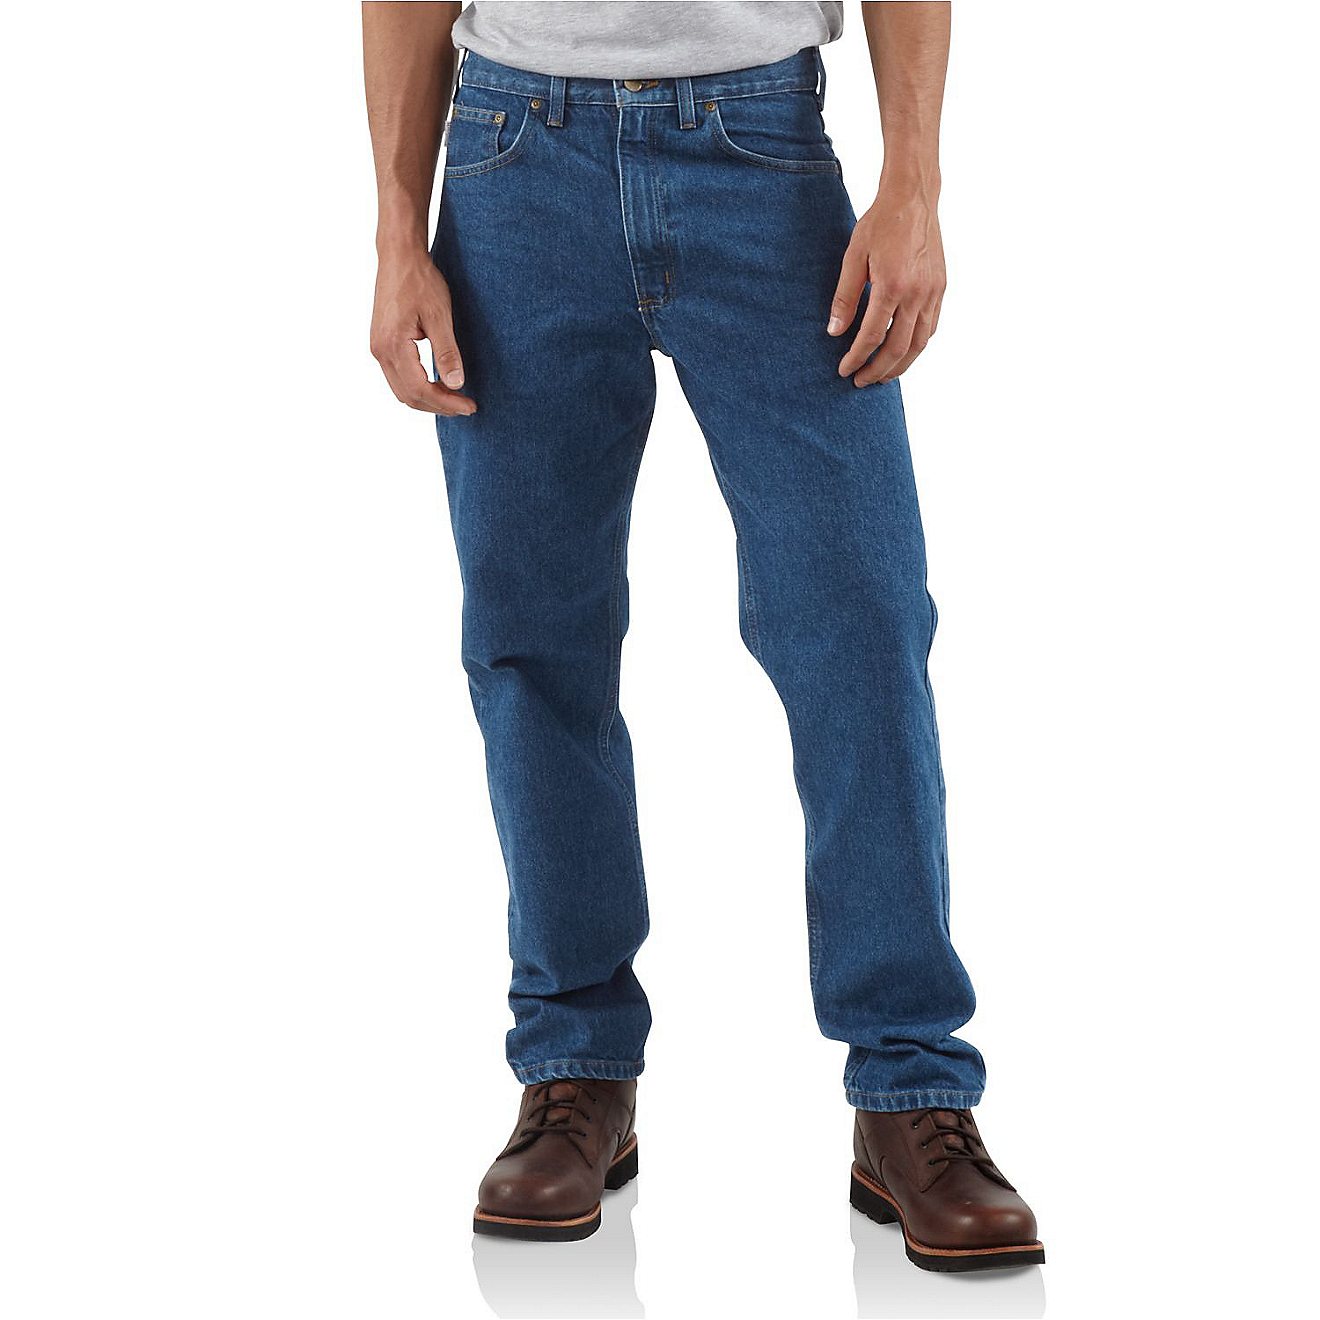 Carhartt Men's Traditional Fit Jean | Free Shipping at Academy